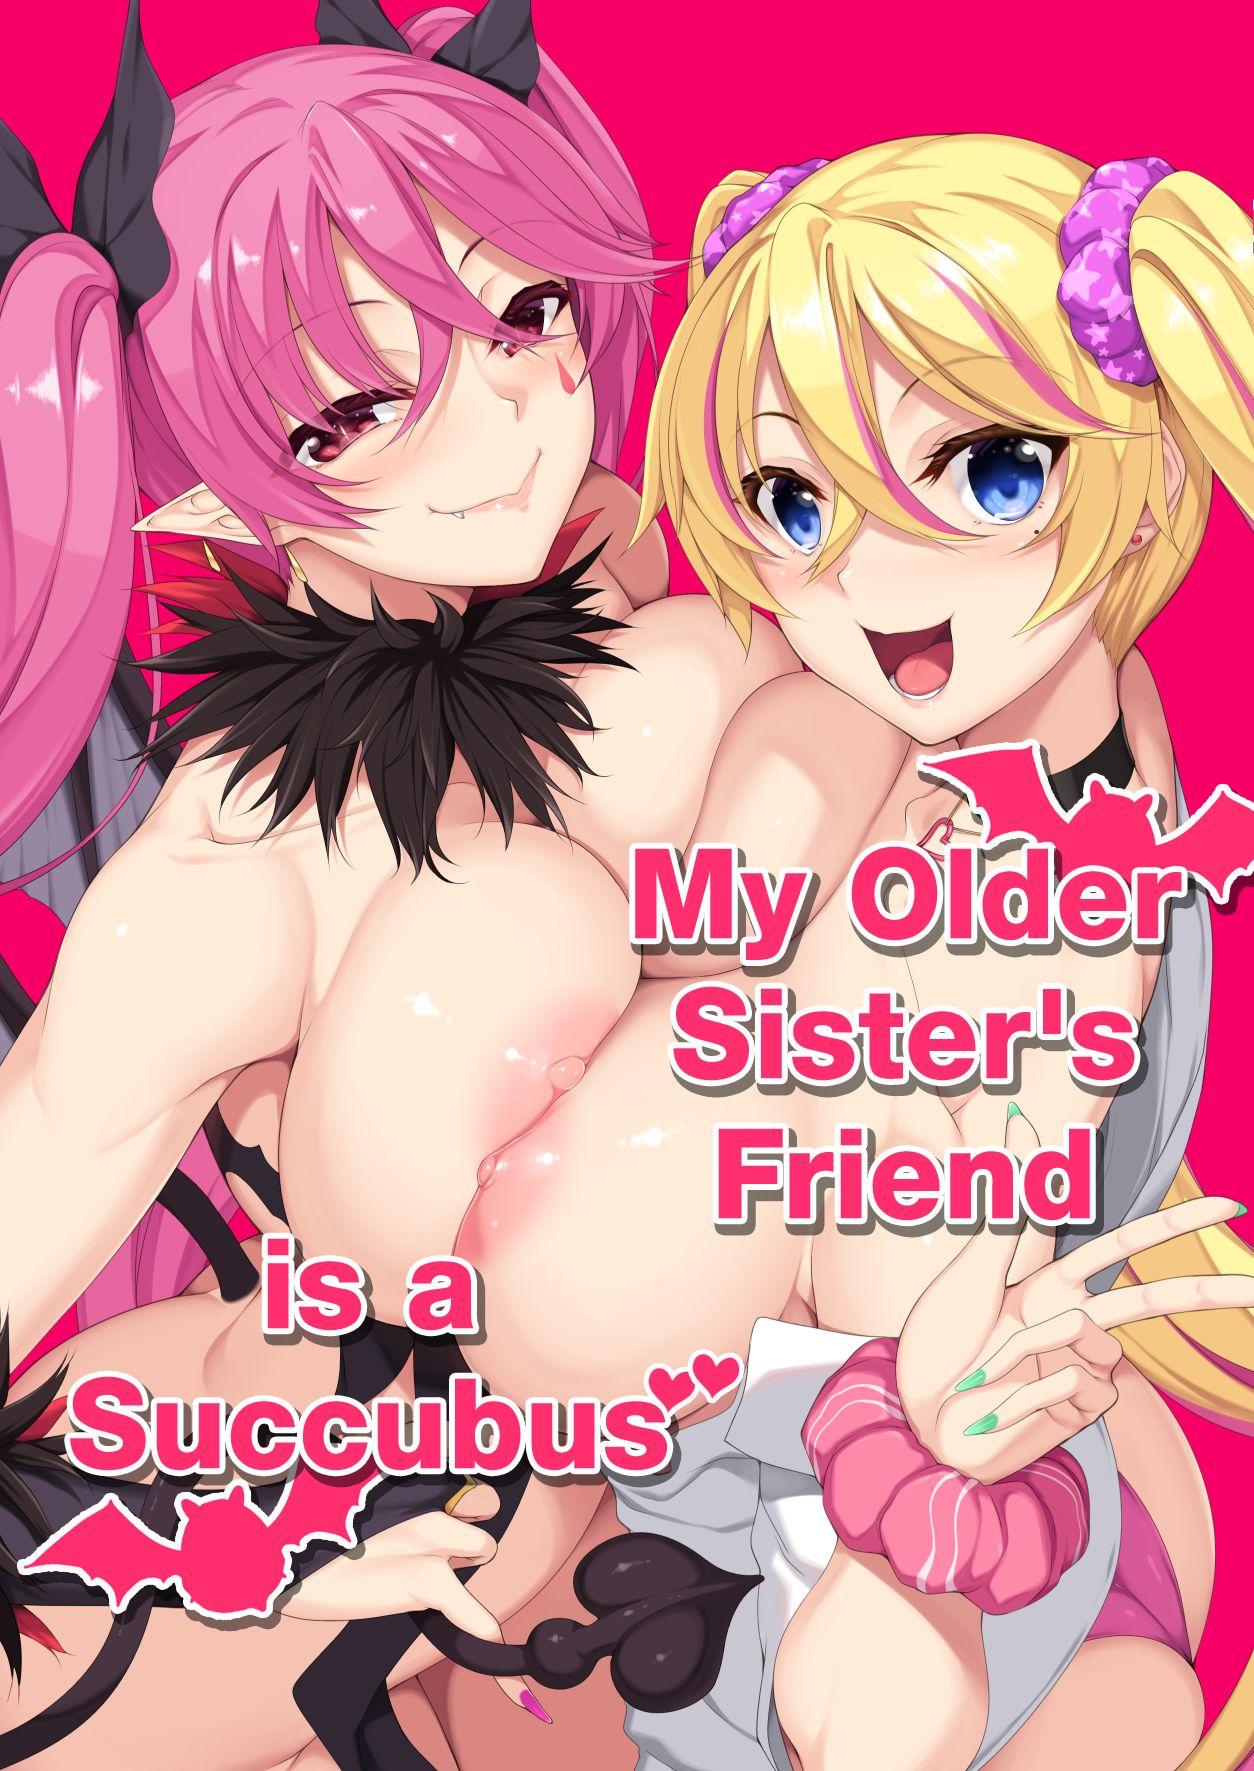 Teenage Onee-chan no Tomodachi ga Succubus de | My Older Sister's Friend is a Succubus - Original Orgasmo - Picture 1